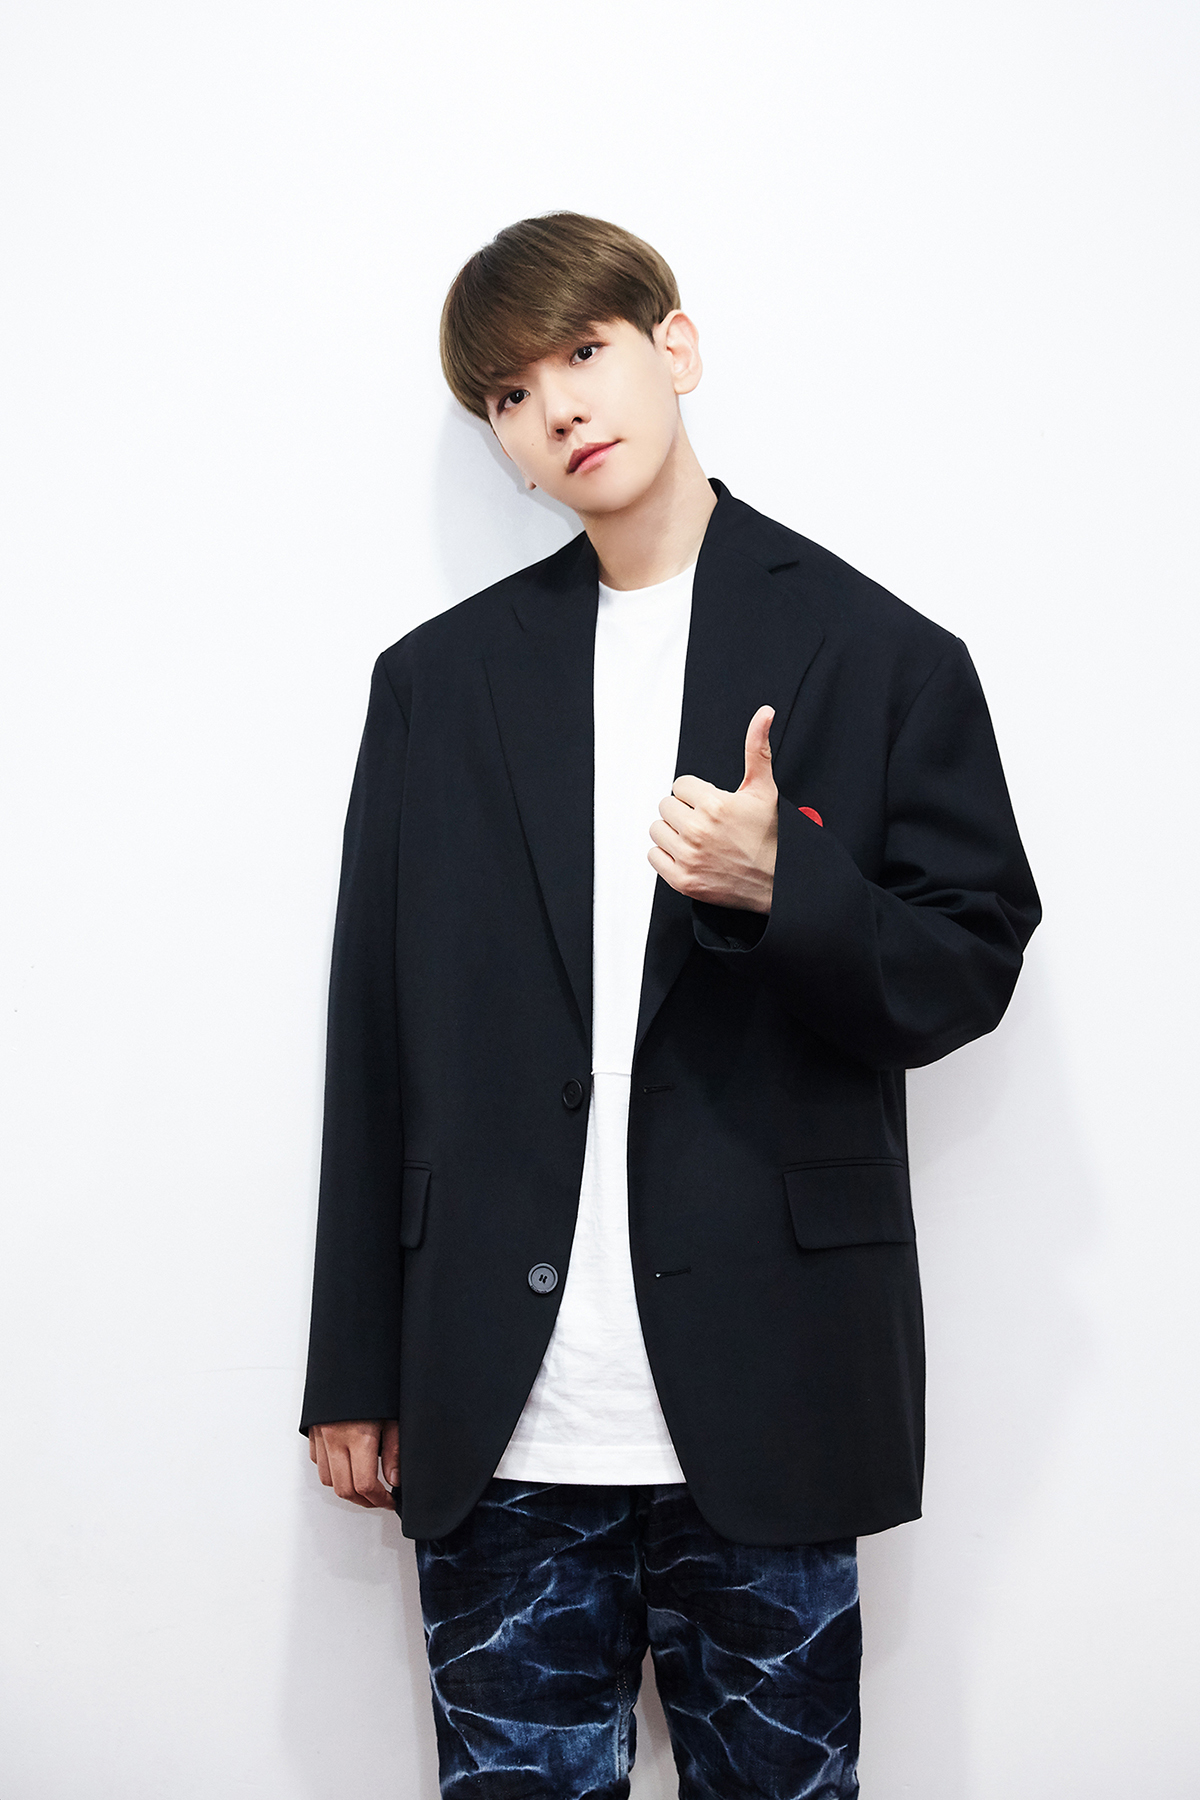 EXO Baekhyun (a member of SM Entertainment) will make a comeback today (25th) with her new Solo album Delight (Delight).Baekhyuns second Mini album Delight will be released on various music sites at 6 pm today, and the title song Candy (Kandy) music video will also be released simultaneously through YouTube and Naver TV SMTOWN channels.Before the release, the new album Delight has gained a lot of attention by exceeding 730,000 pre-orders, and Baekhyun has announced the story and goal of the new song before the full-scale activity.The following is a solo album released about 10 months after the first mini album, QA. Q1. What about the comeback testimony?- I am very nervous as I am returning to the Solo album for a long time, but I am happy to think about the fans who waited for my album.Q2. Introduce the second Mini album Delight.- Delight means joy in the dictionary sense, and I wanted to give joy to many people through this album.(Laughing) And as I had the superpower of Light in EXO, I wanted to put light in the album name, but I decided to give Delight to give City Lights, which was Solos debut album, and the following Feelings.There are a total of 7 songs in various atmosphere including the title song Candy.Q3. What song is the title song Candy? What if there is an appreciation point?- Candy is a trendy R & B song, and I likened the various charms and appearances I have to Kandy of various flavors.If you look closely, there are many sensual and sensible expressions that show taste like adult cinnamon, a little funny mint, so this part seems to be an appreciation point.Q4. Candy is a song that likens the charm of Baekhyun to candy, and what flavors do you think best?- Ill try it with a sweet, sour strawberry flavor. I personally like strawberries. (Laughs)Q5. This Candy stage also features performance, which choreography is especially concerned about?- This performance was with Kasper, a choreographer and my longtime friend, who used to tell me about the usual dances.Candy is a very trendy Feelings song, so it melted the hip movements that are gaining popularity globally in performance according to the song style.I was especially concerned about choreography in the chorus.Q6. What was the reaction of EXO members who heard the title song Candy?The members cheered for the song, saying, I love it. The guardian and the chan-yeol also came to the music video shooting scene and gave me great strength. (Laughing)Q7. From the first Solo album to this album, we are introducing the R & B genre. What if there is a genre that I want to try Top Model in the future?- I would like to try Top Model in the rock ballad genre after a little more time.I am listening to various genres of songs these days, and I personally thought that the rock ballads have a great deal of luck.Q8. What if you pick Delight that makes Baekhyun enjoyable these days?- Apology! (Laughing) Nowadays, I try to eat apples at my first meal every day.I do not think I have much health so far, so I am living to improve my immunity and to take care of my health.Q9.With his debut album, he has achieved good results such as # 1 sales of Solo Singer albums in 2019, Golden Disc Awards record category, # 1 in 66 regions around the world on iTunes top album charts. What if he wants to achieve this album?iMBC  Photos